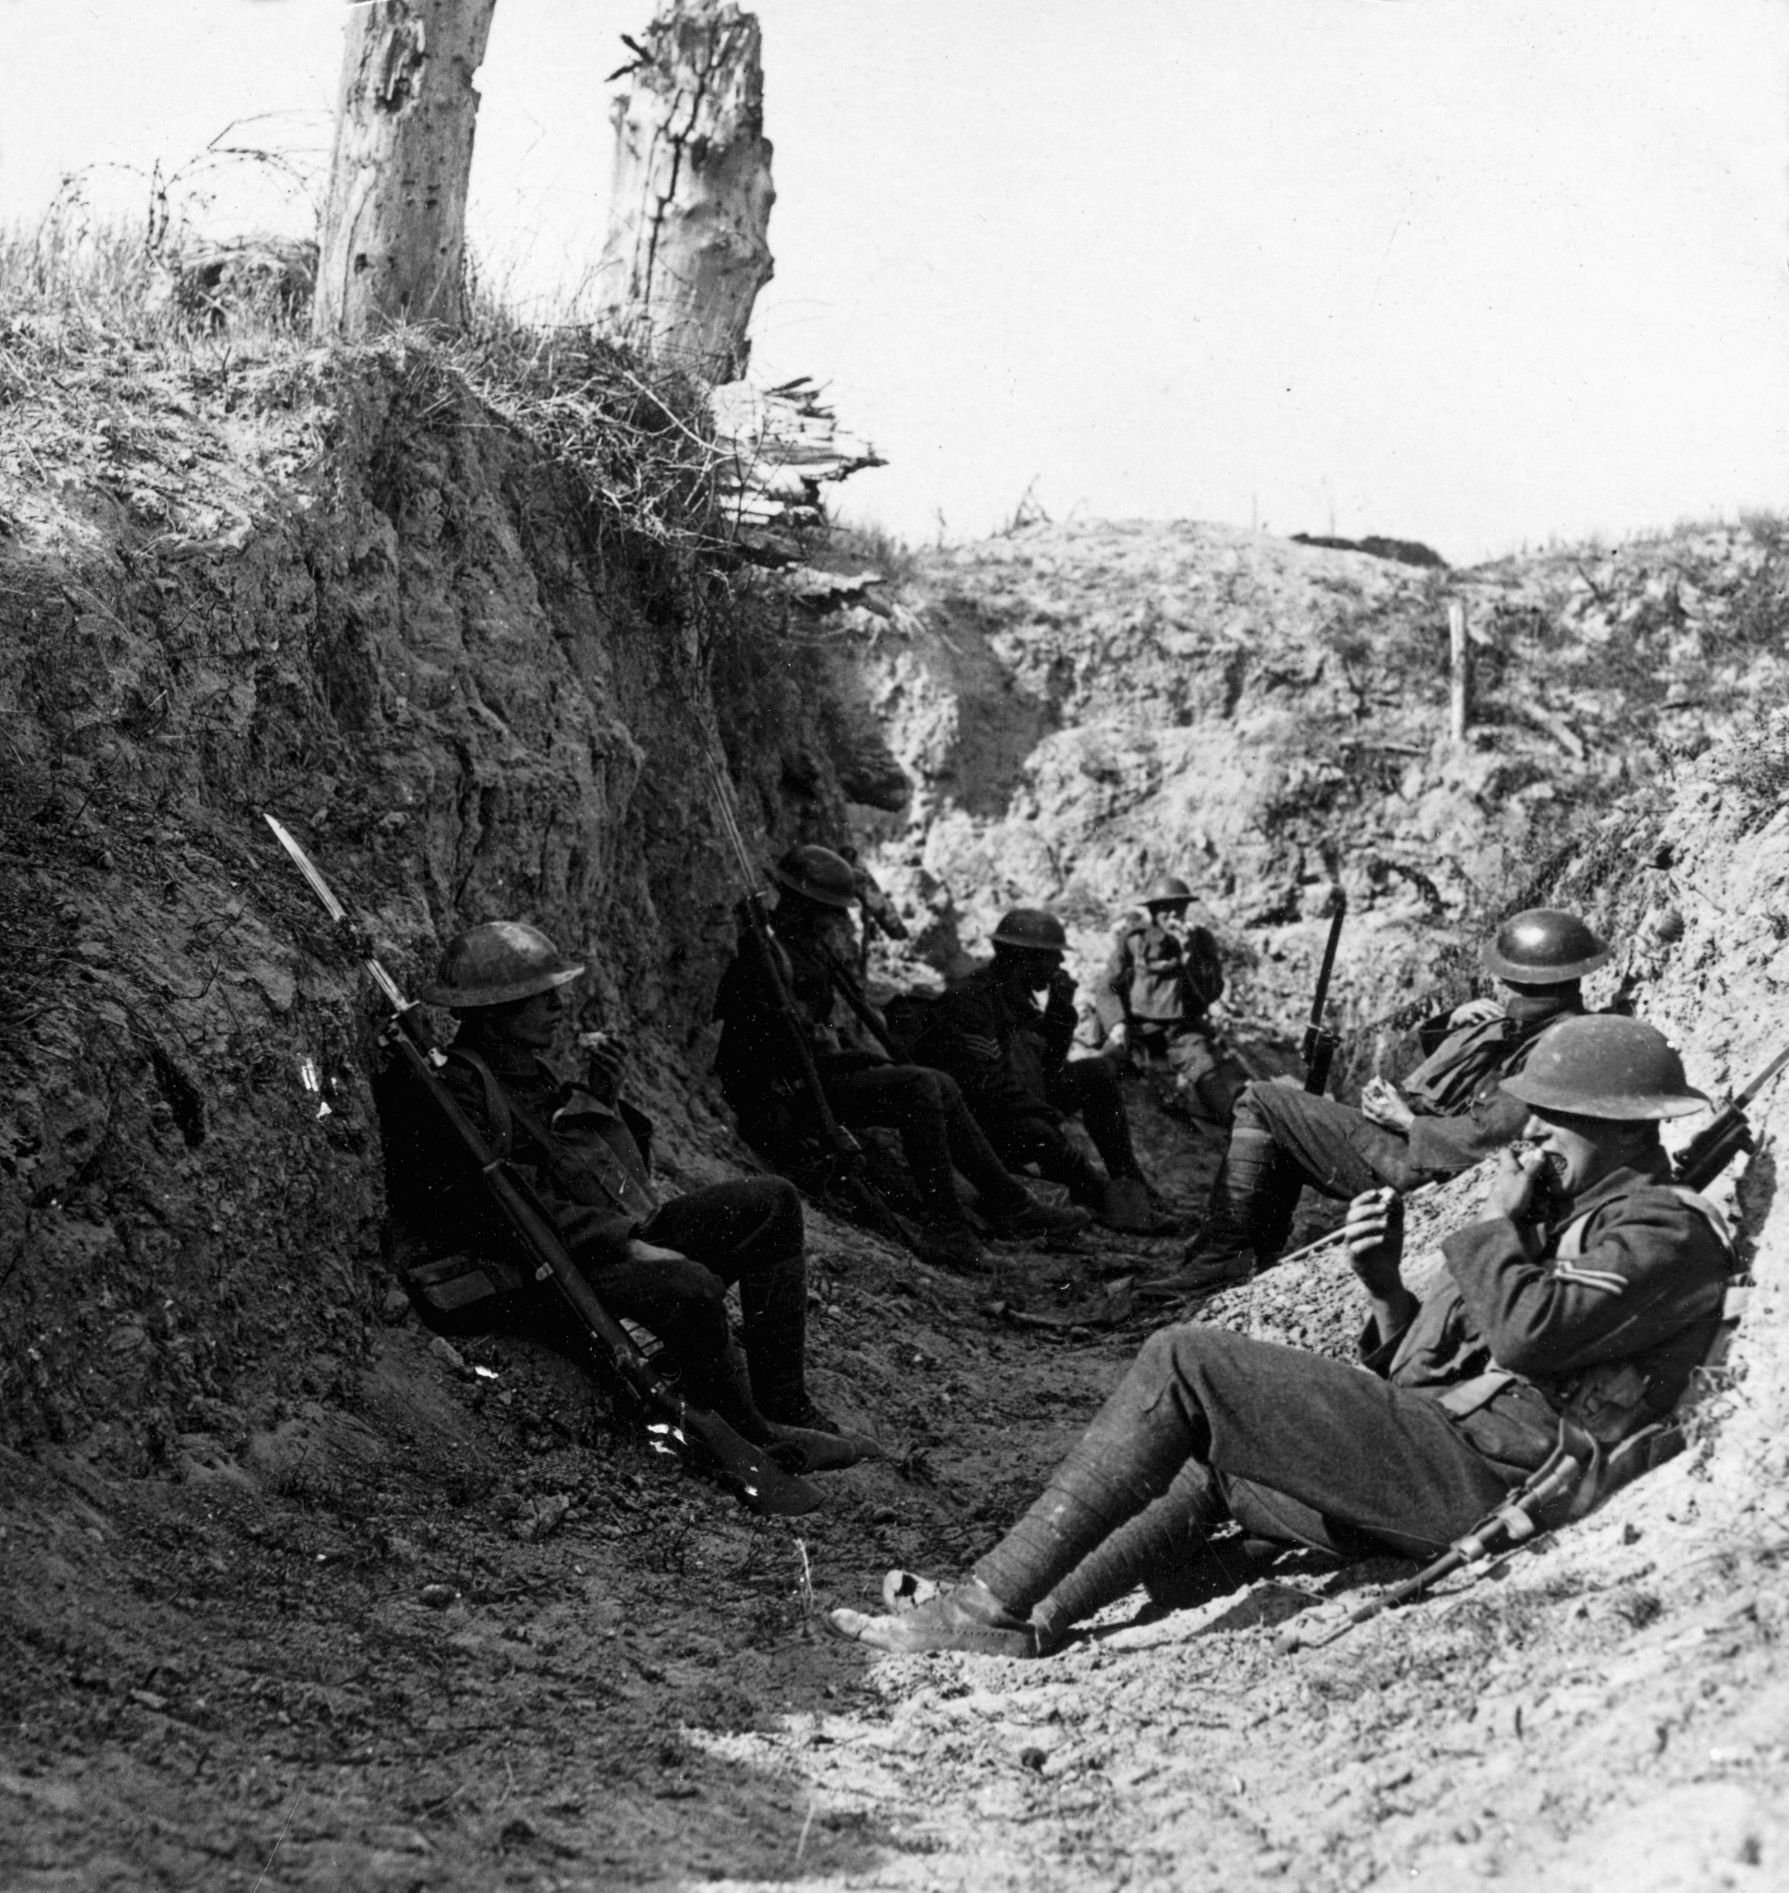 Troops of the 11th Battalion wait in the trenches at Arras, France. The battalion was typically hard hit by casualties.